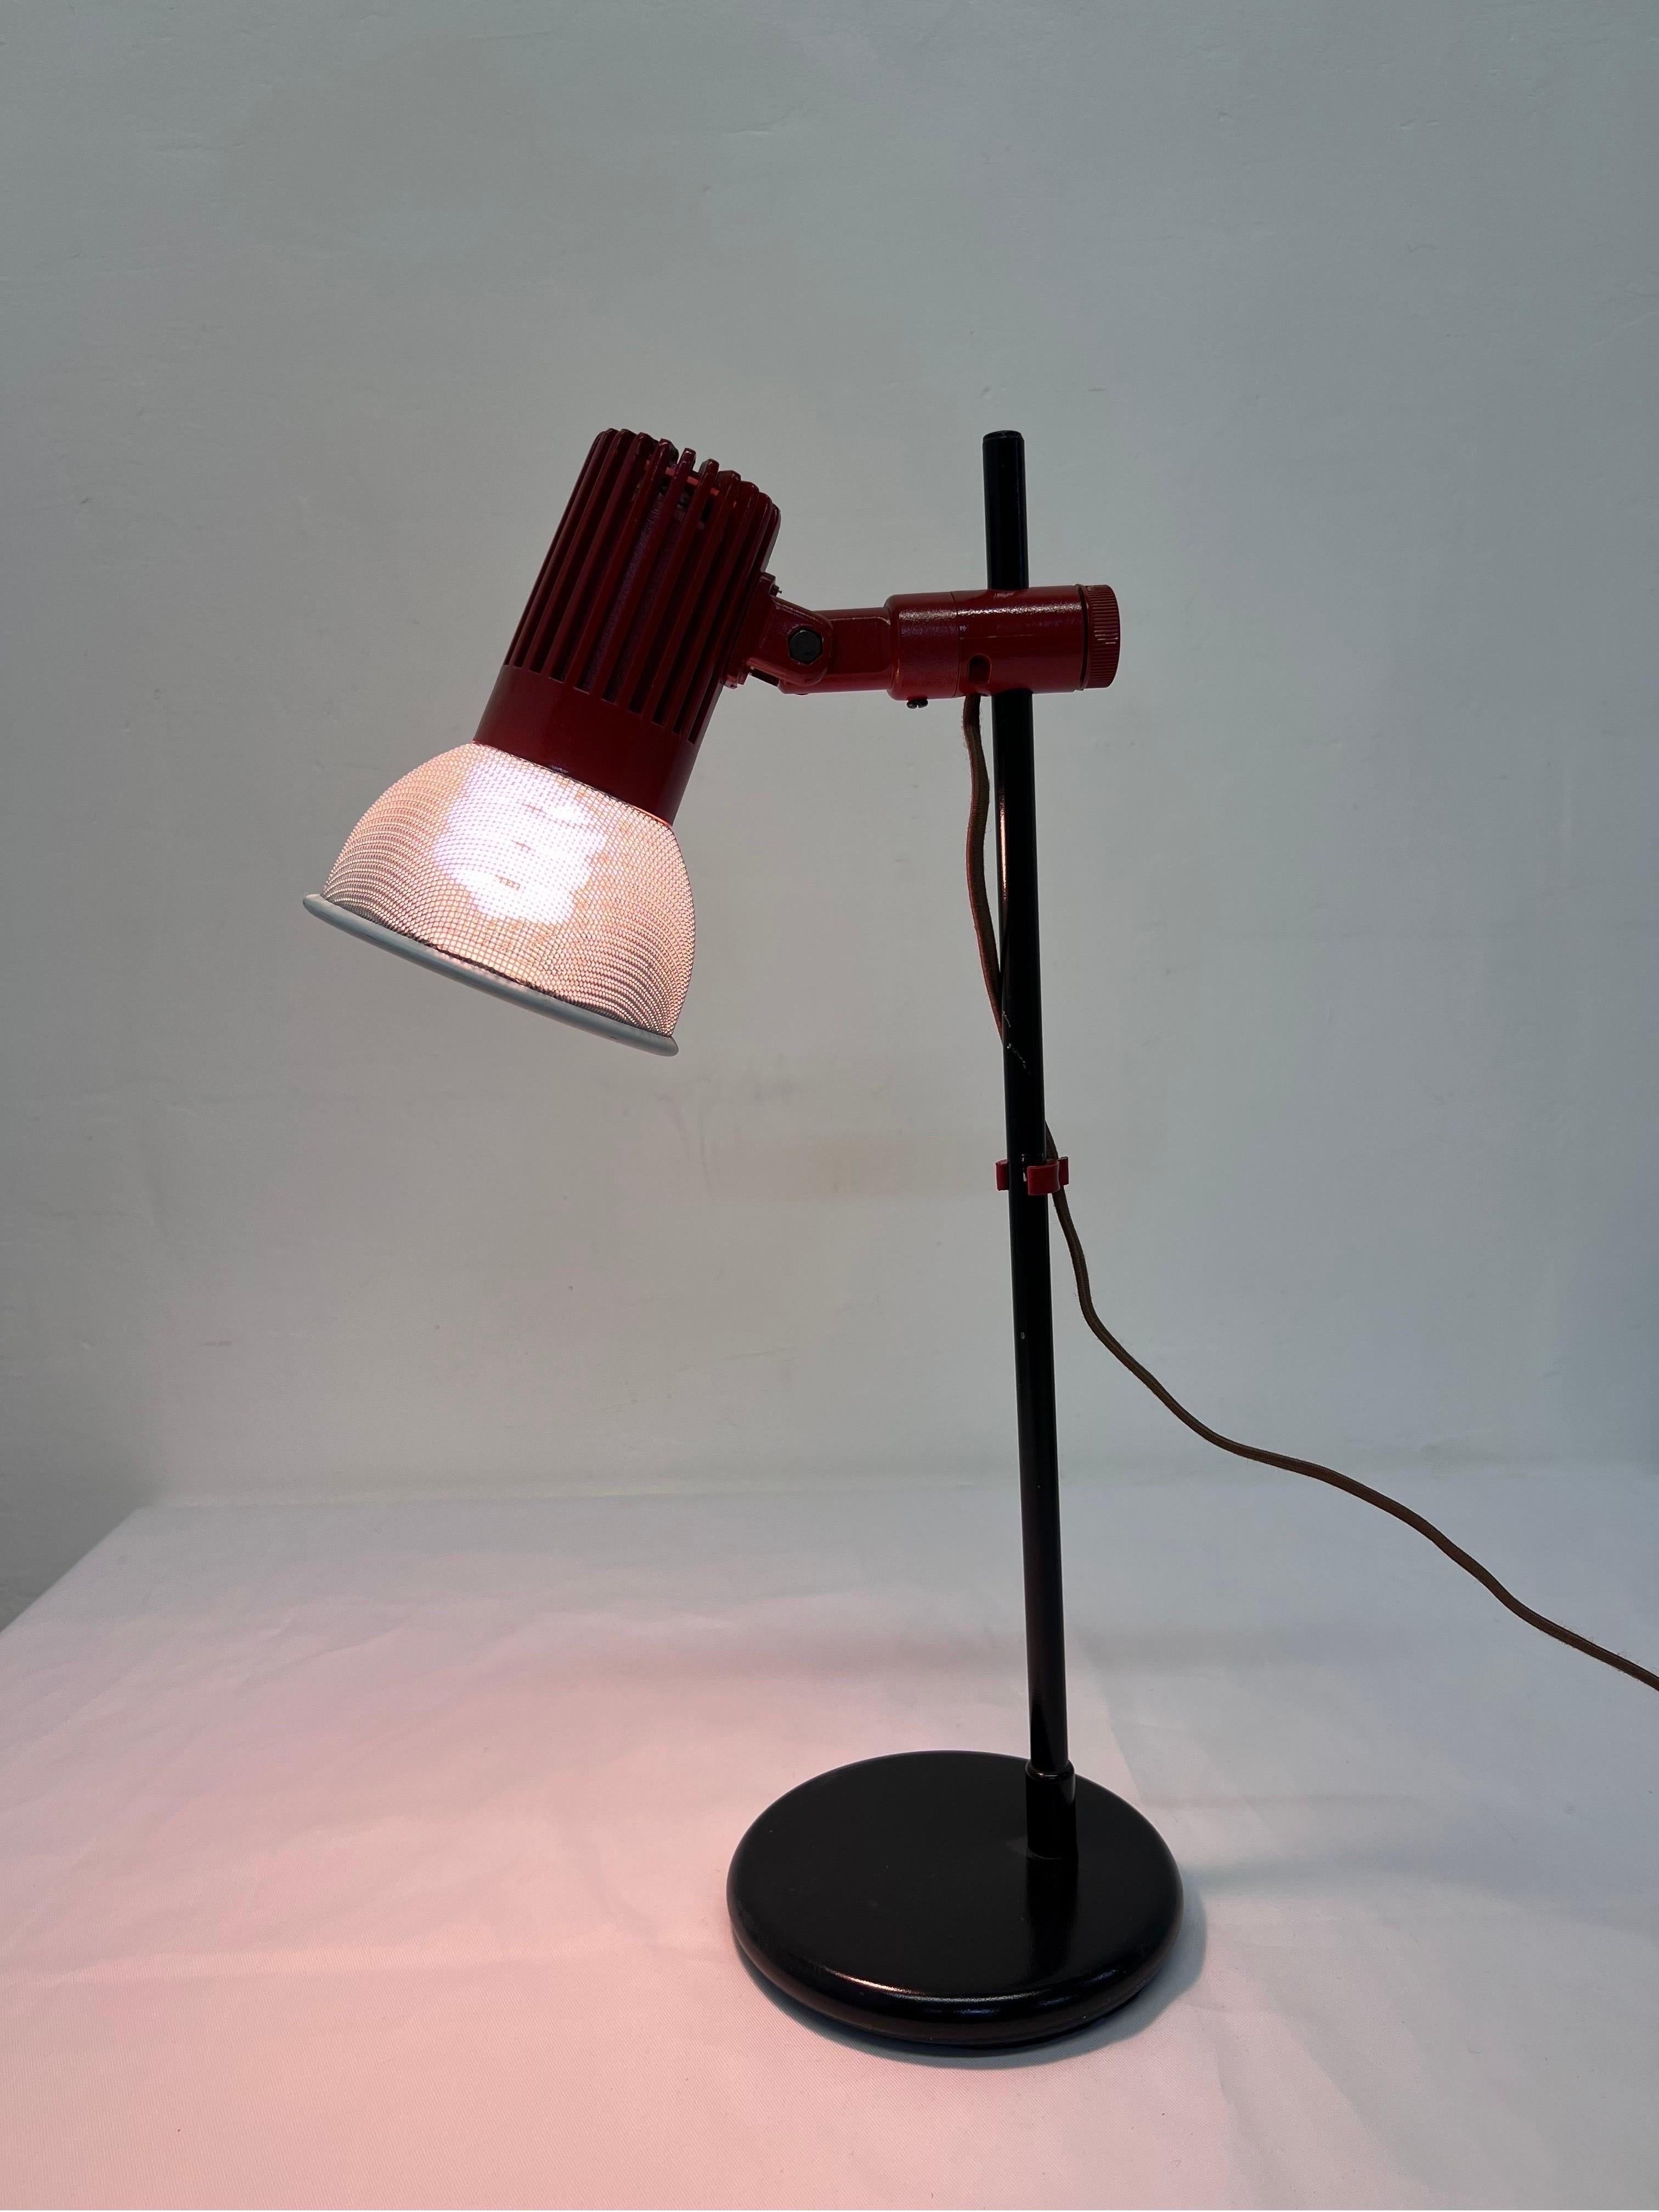 Mid-Century Adjustable Desk or Table Lamp with Perforated Shade by Unilite In Good Condition For Sale In Miami, FL